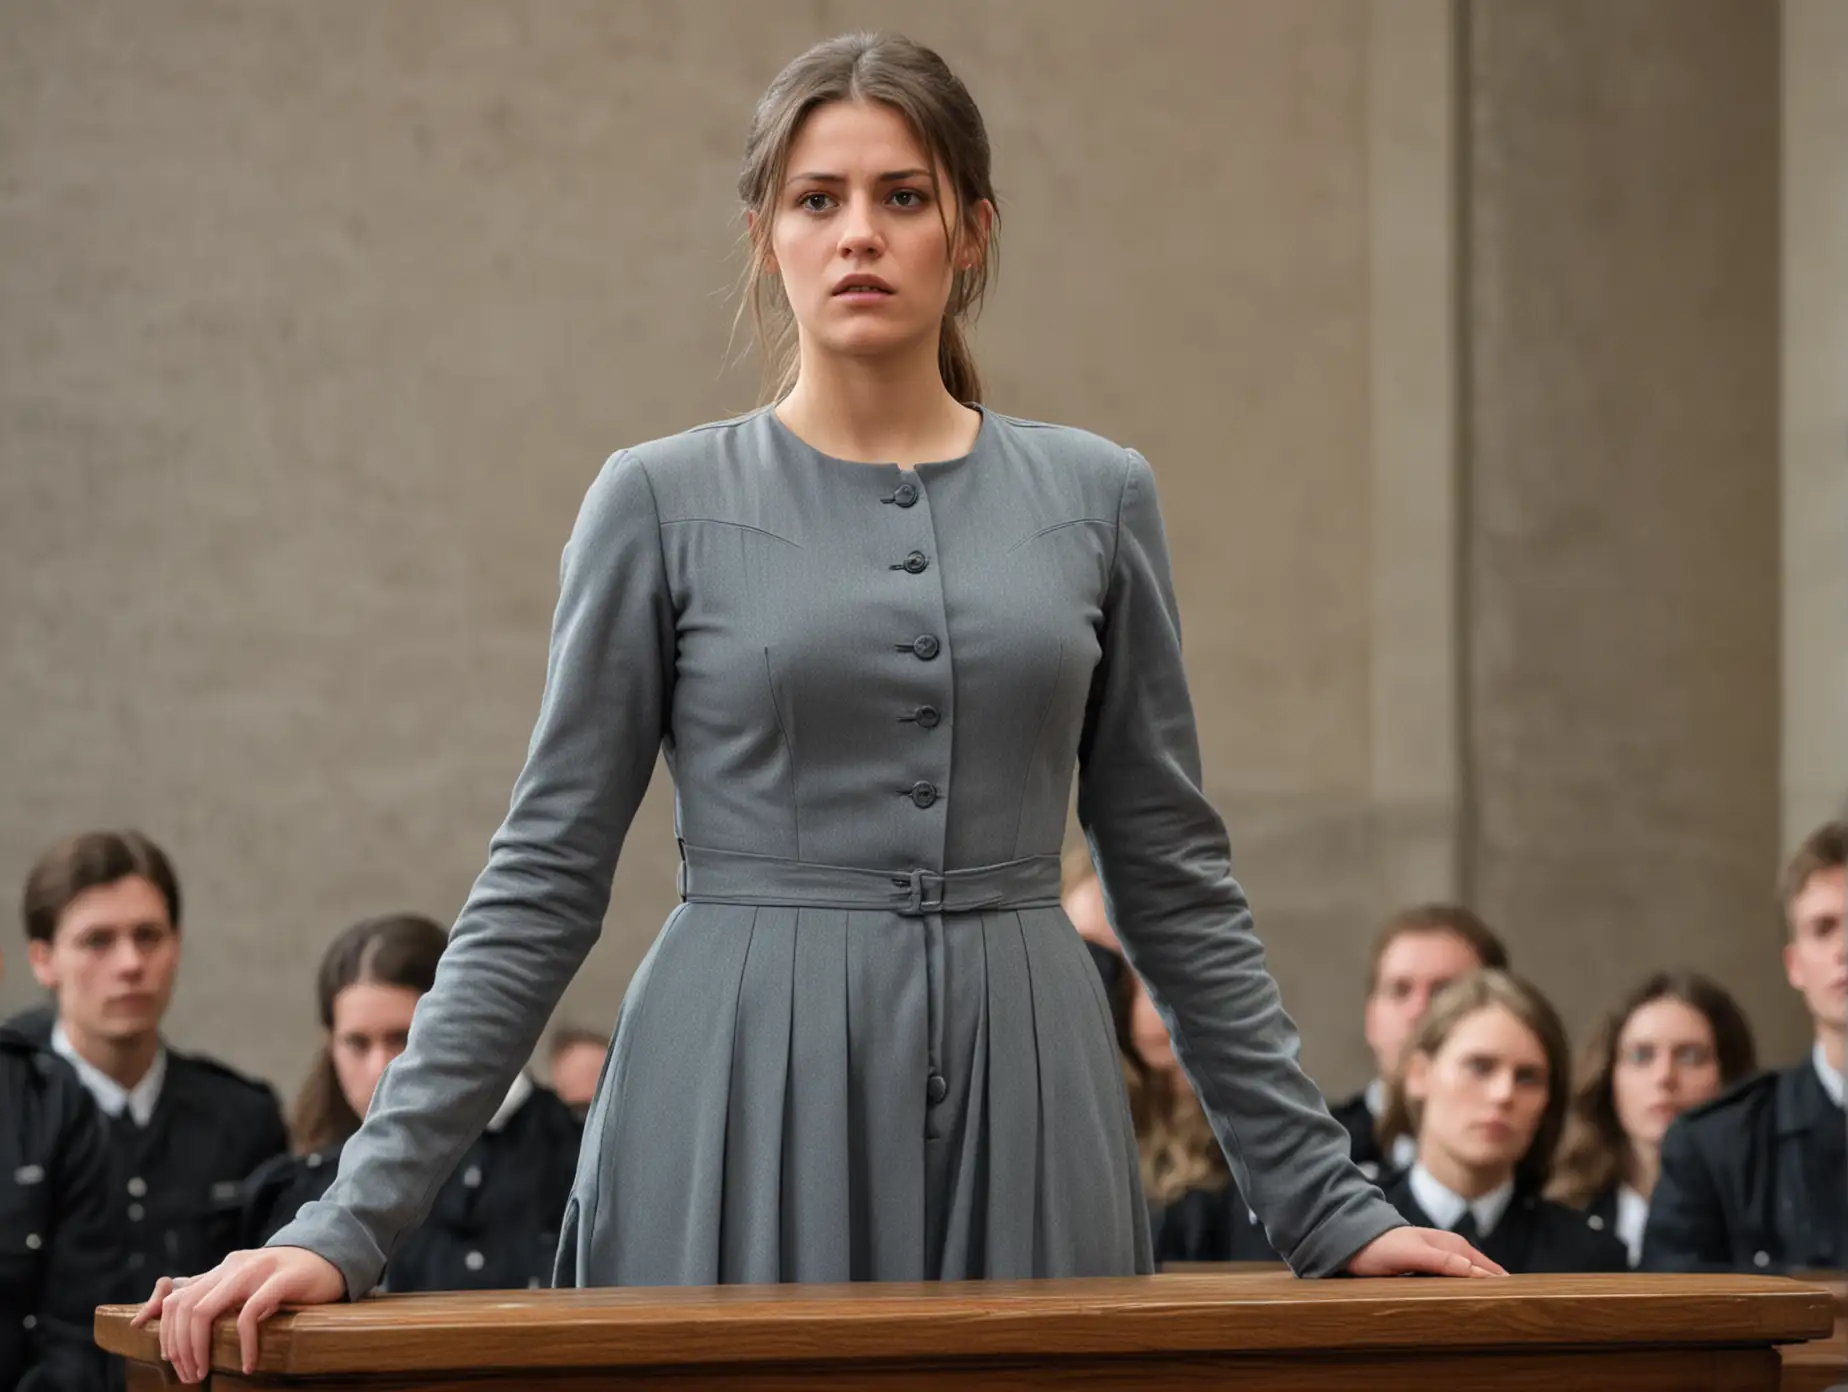 A busty female prisoner (german, 25 years old) stand on a pulpit before the court on her trial (1900s) in gray buttoned longsleeve collarless prisonerdress(round-neckline, nape-lenght hair), head to knee view, She is sad and desperate